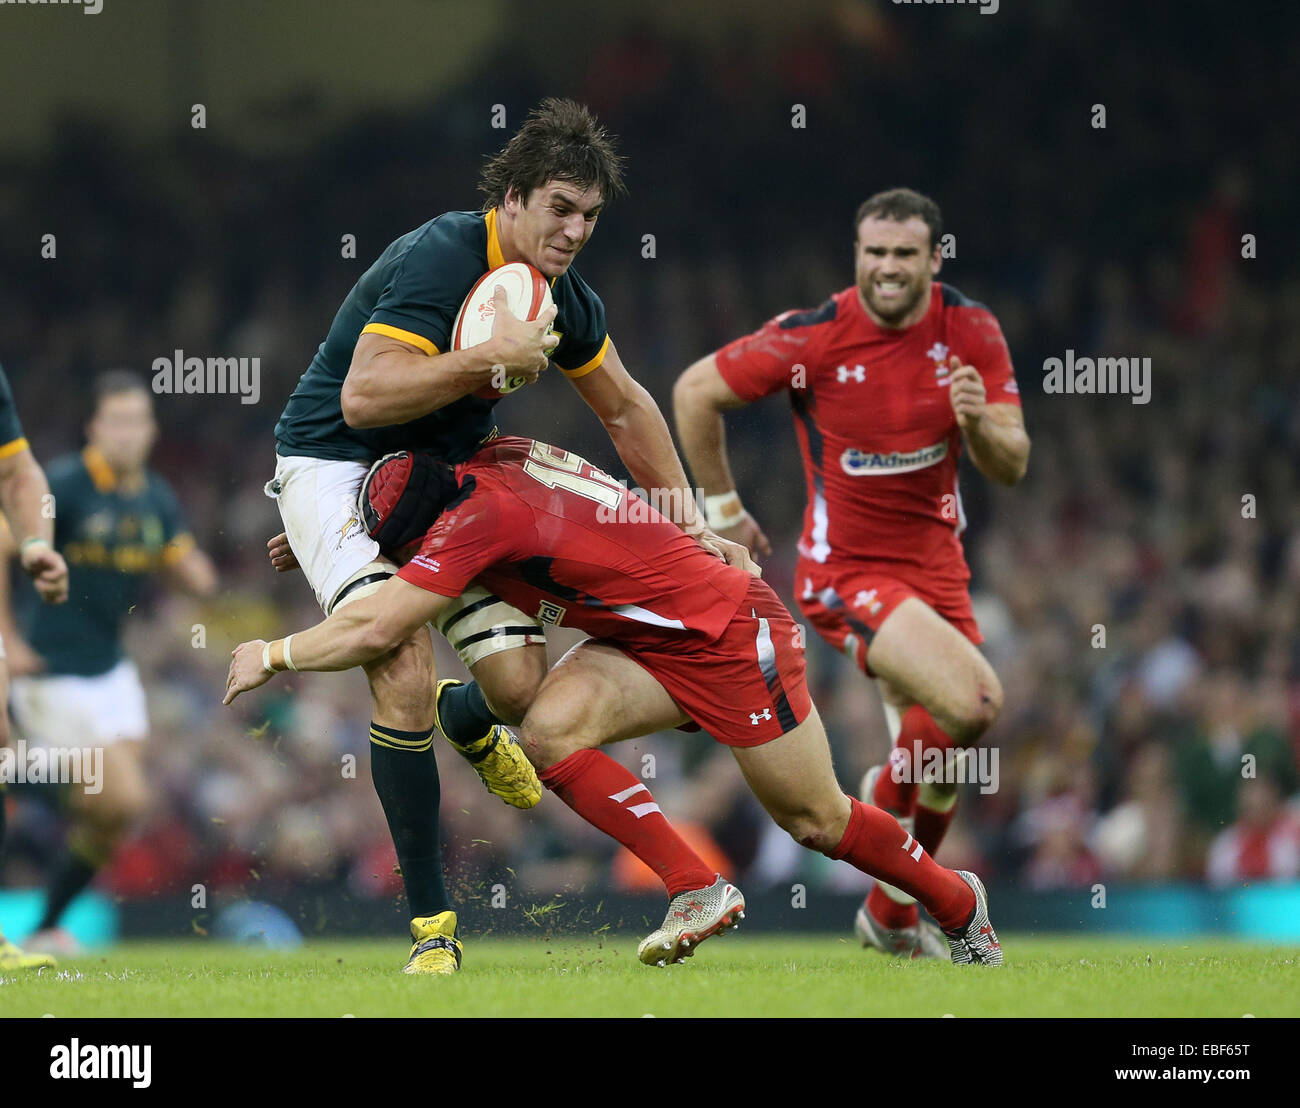 Cardiff, UK. 29th Nov, 2014. Last man Leigh Halfpenny of Wales brings down Eben Etzebeth of South Africa - Autumn Internationals - Wales vs South Africa - Millennium Stadium - Cardiff - Wales - 29th November 2014 - Picture Simon Bellis/Sportimage. Credit:  csm/Alamy Live News Stock Photo